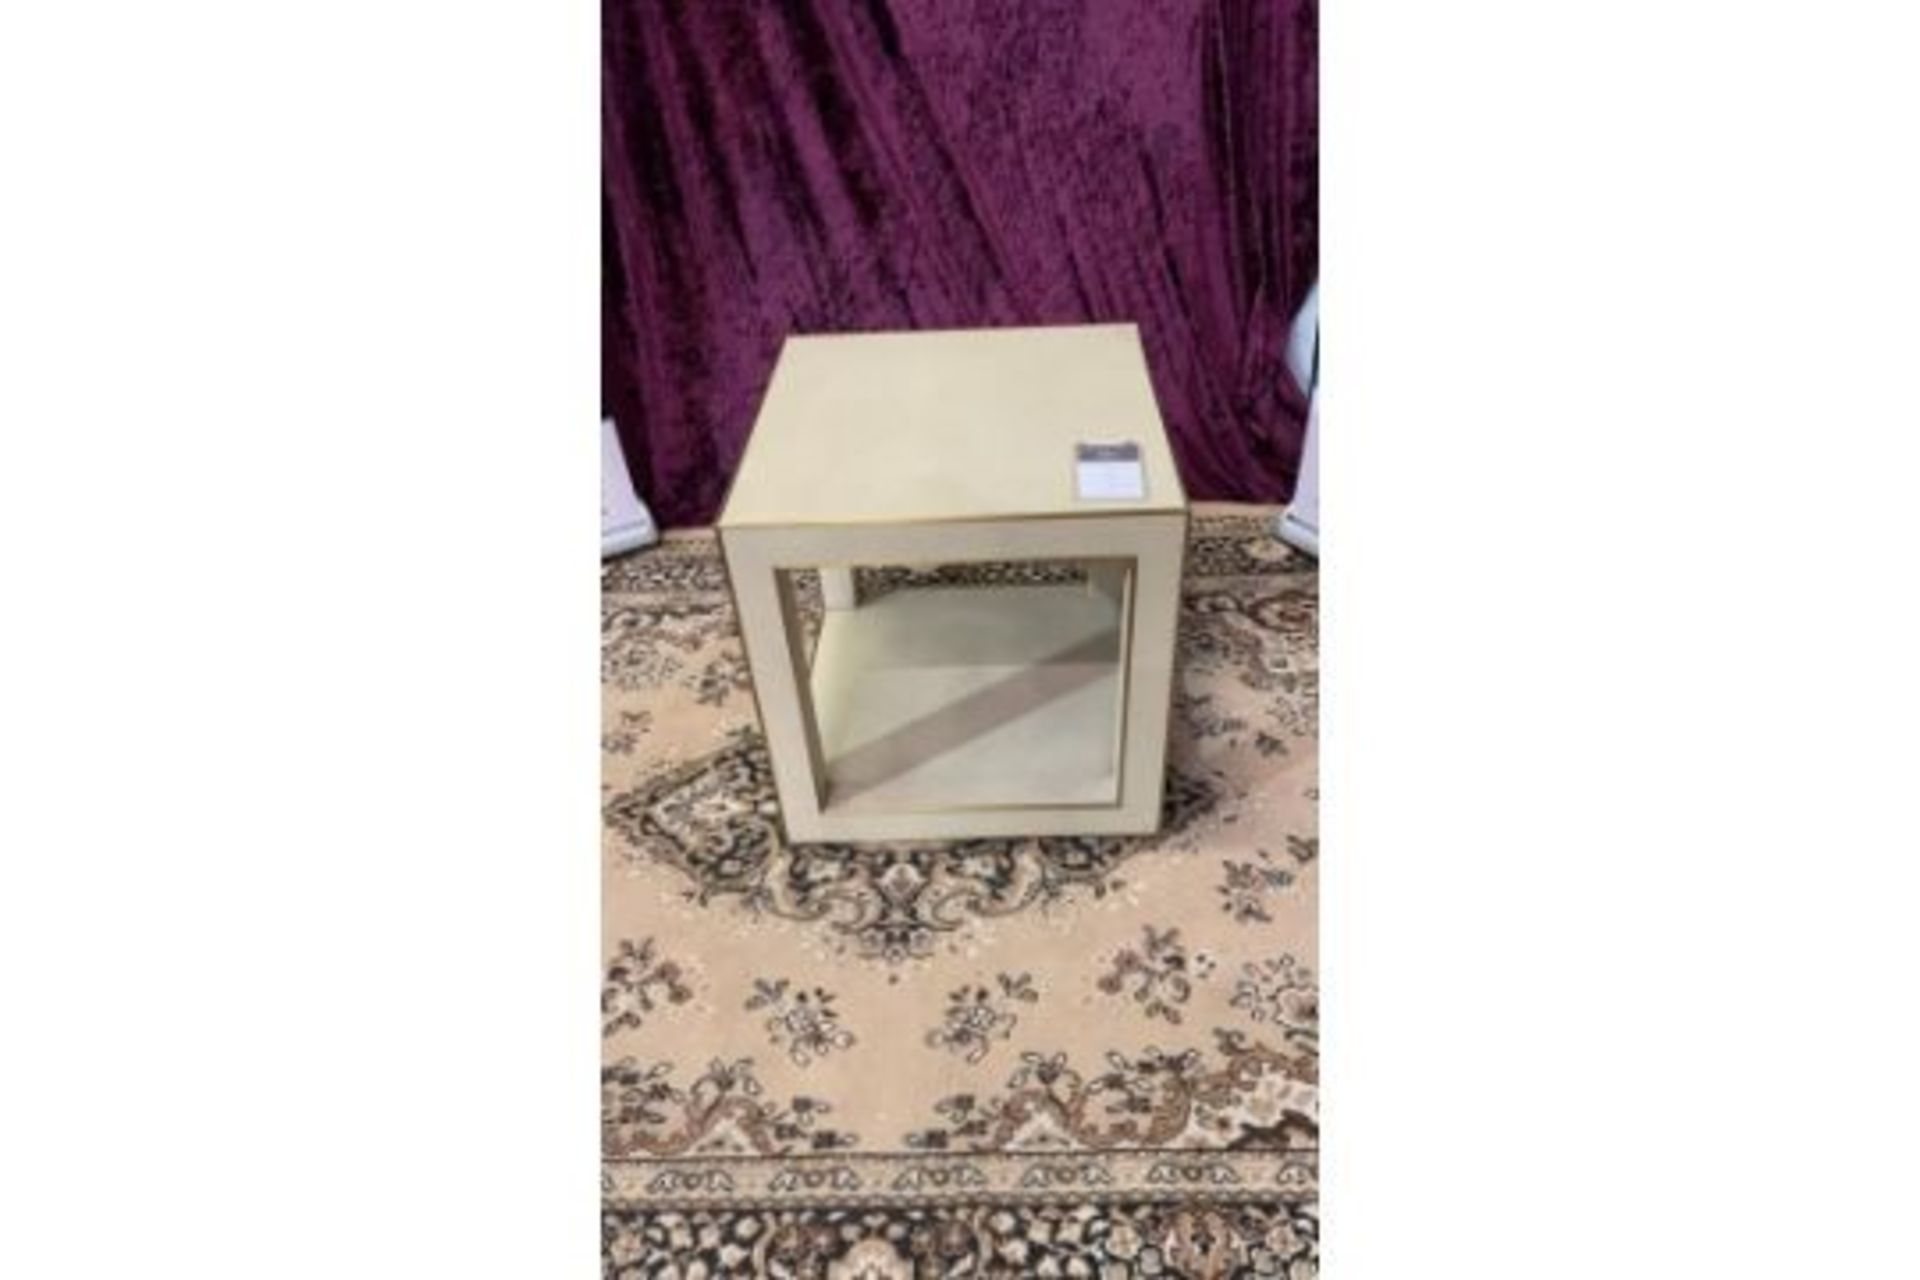 Cela Green Shagreen Square Side Table Crafted Of Shagreen-Embossed Leather With The Texture - Bild 2 aus 2